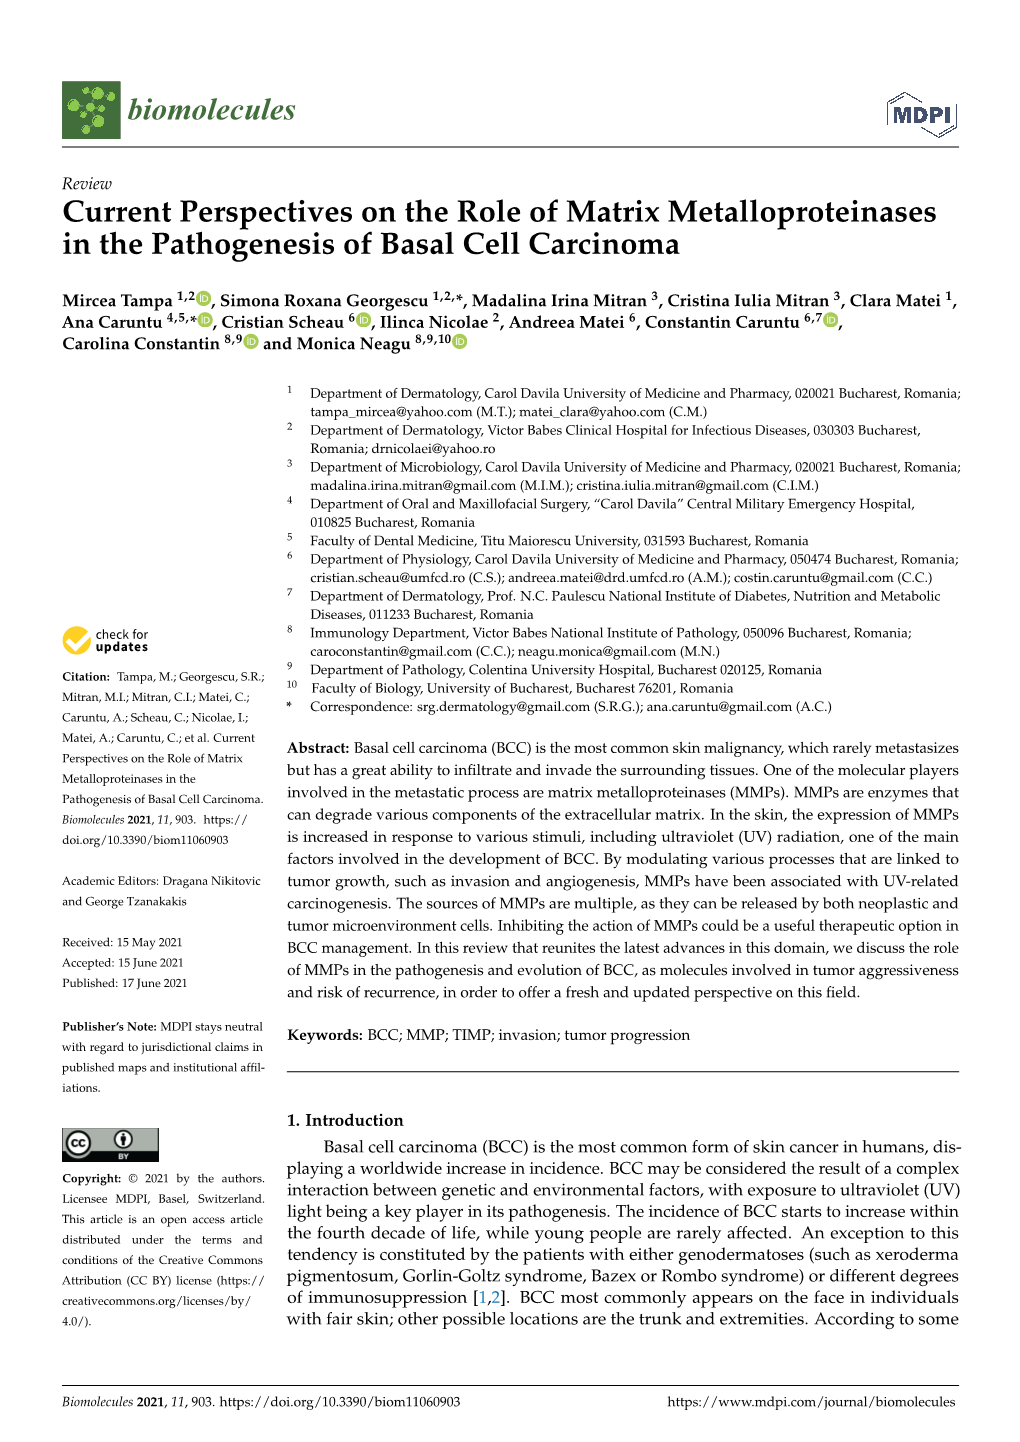 Current Perspectives on the Role of Matrix Metalloproteinases in the Pathogenesis of Basal Cell Carcinoma